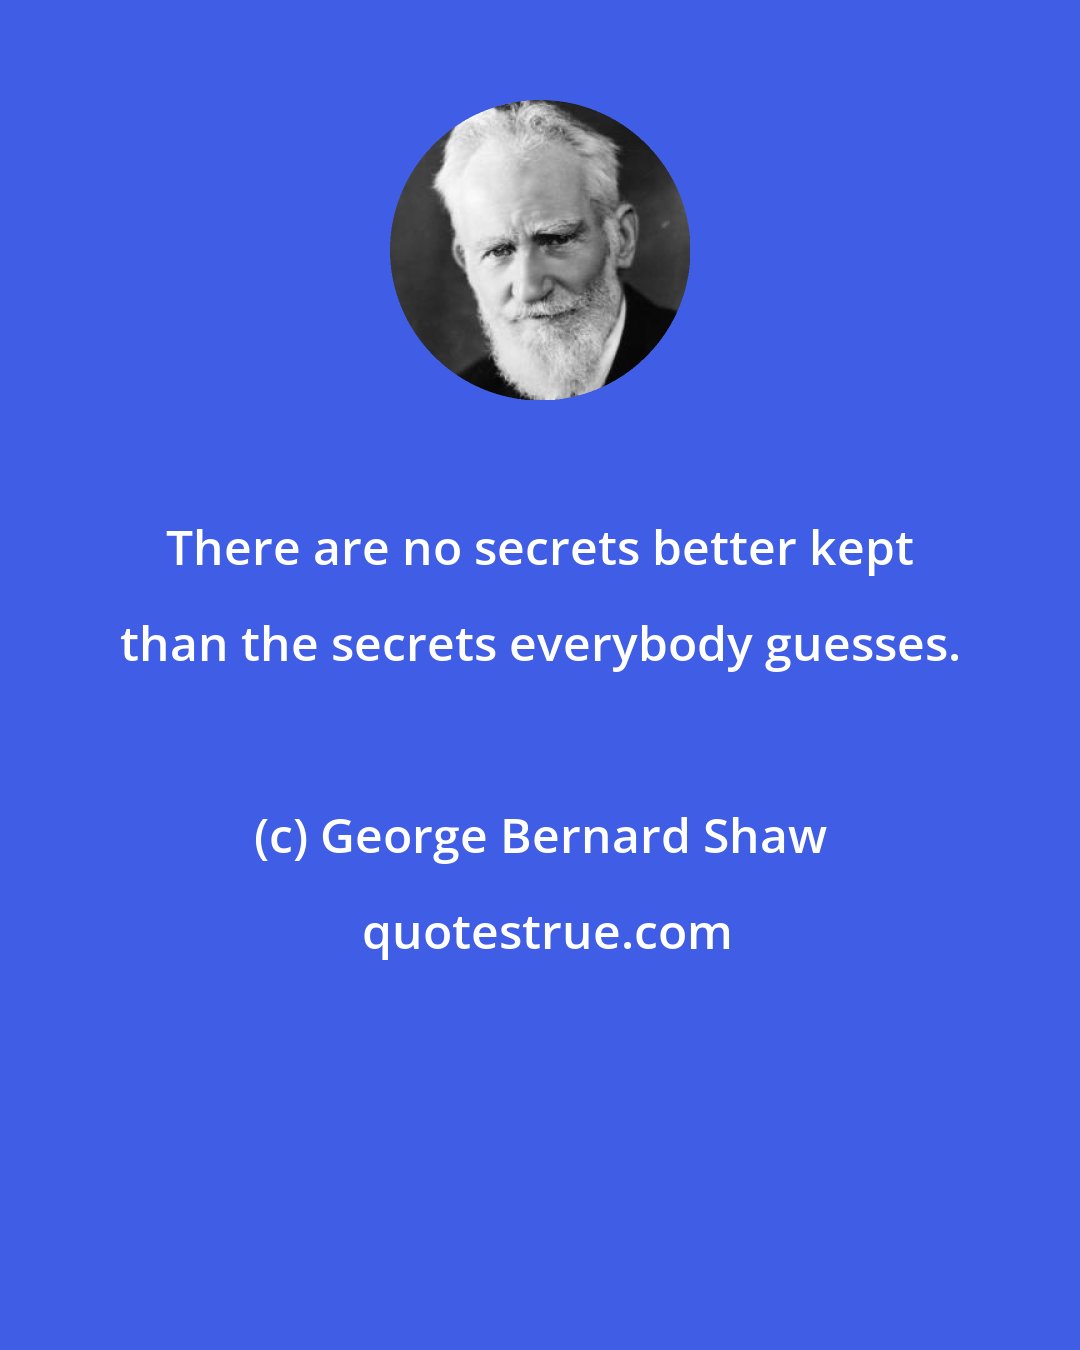 George Bernard Shaw: There are no secrets better kept than the secrets everybody guesses.